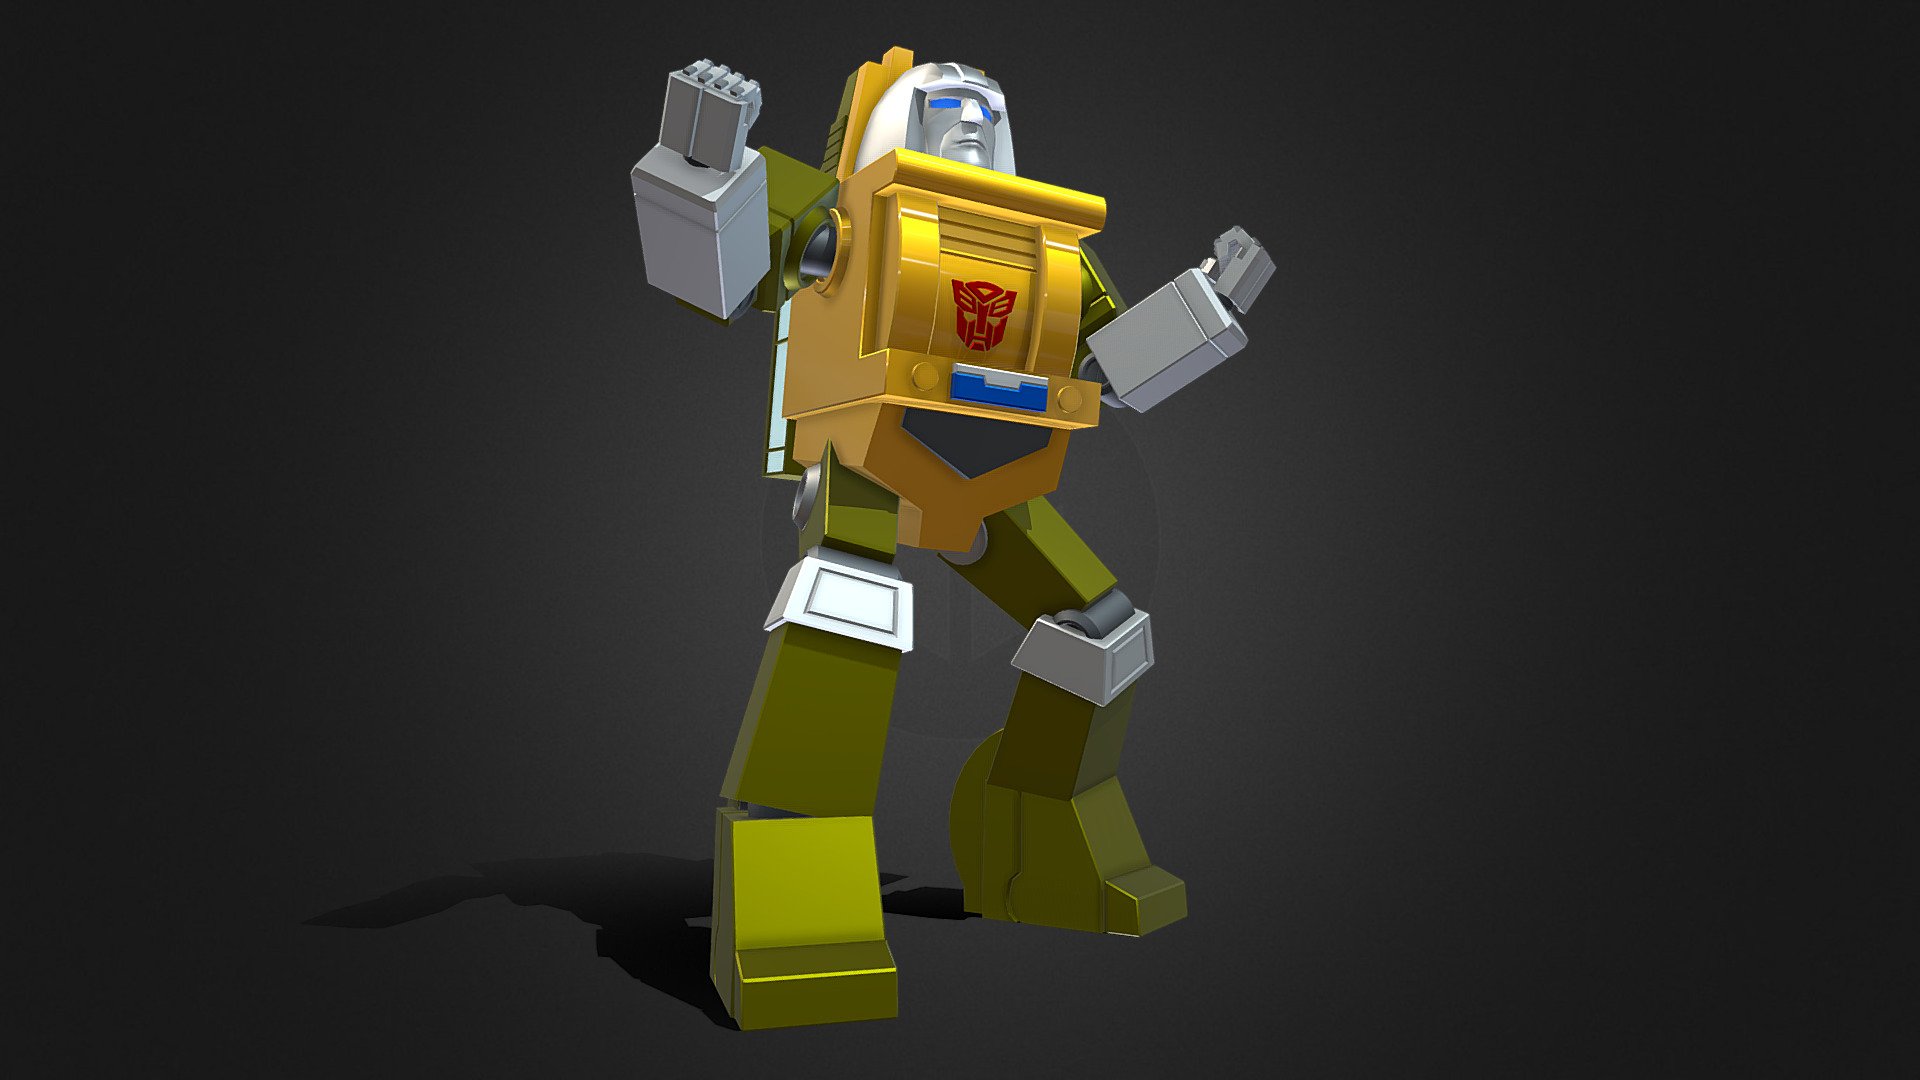 If you’re interested in purchasing any of my models, contact me @ andrewdisaacs@yahoo.com

Brawn from Season 1 of the Transformers G1 cartoon.

Made by myself in 3DS Max 3d model